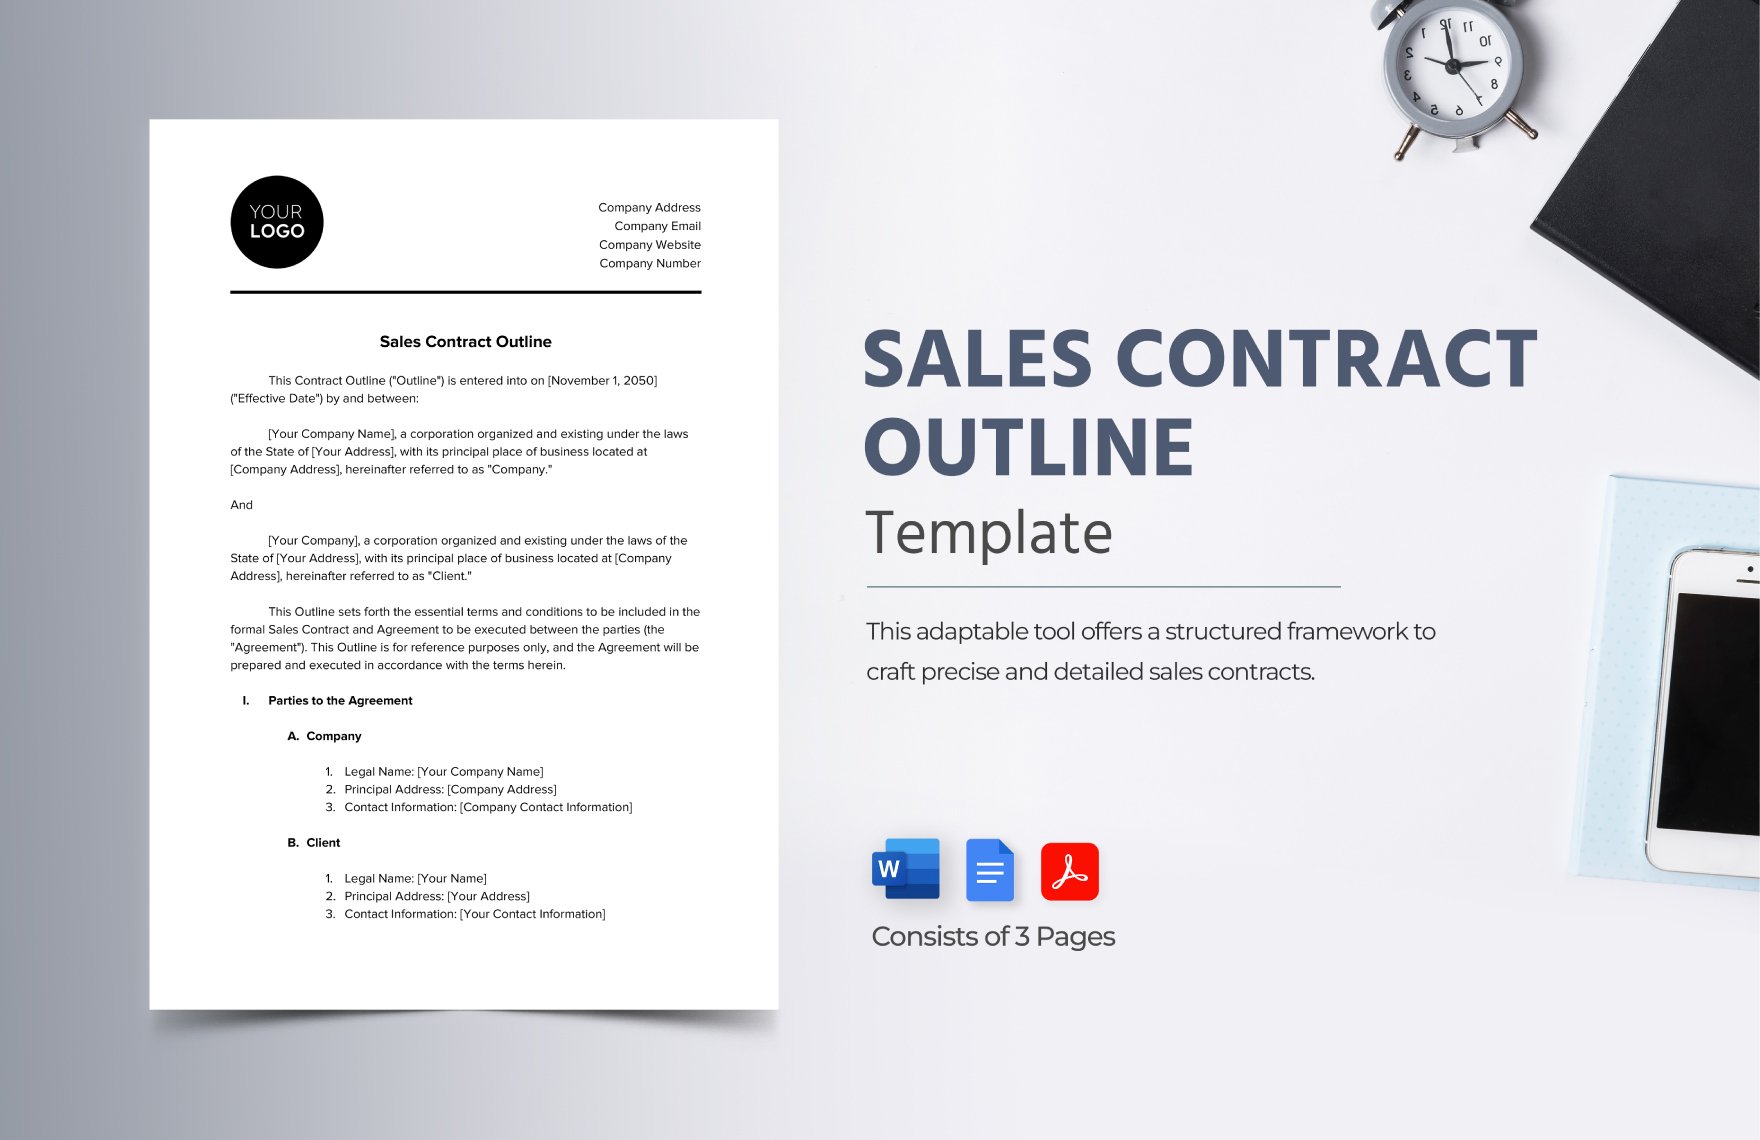 Sales Contract Outline Template